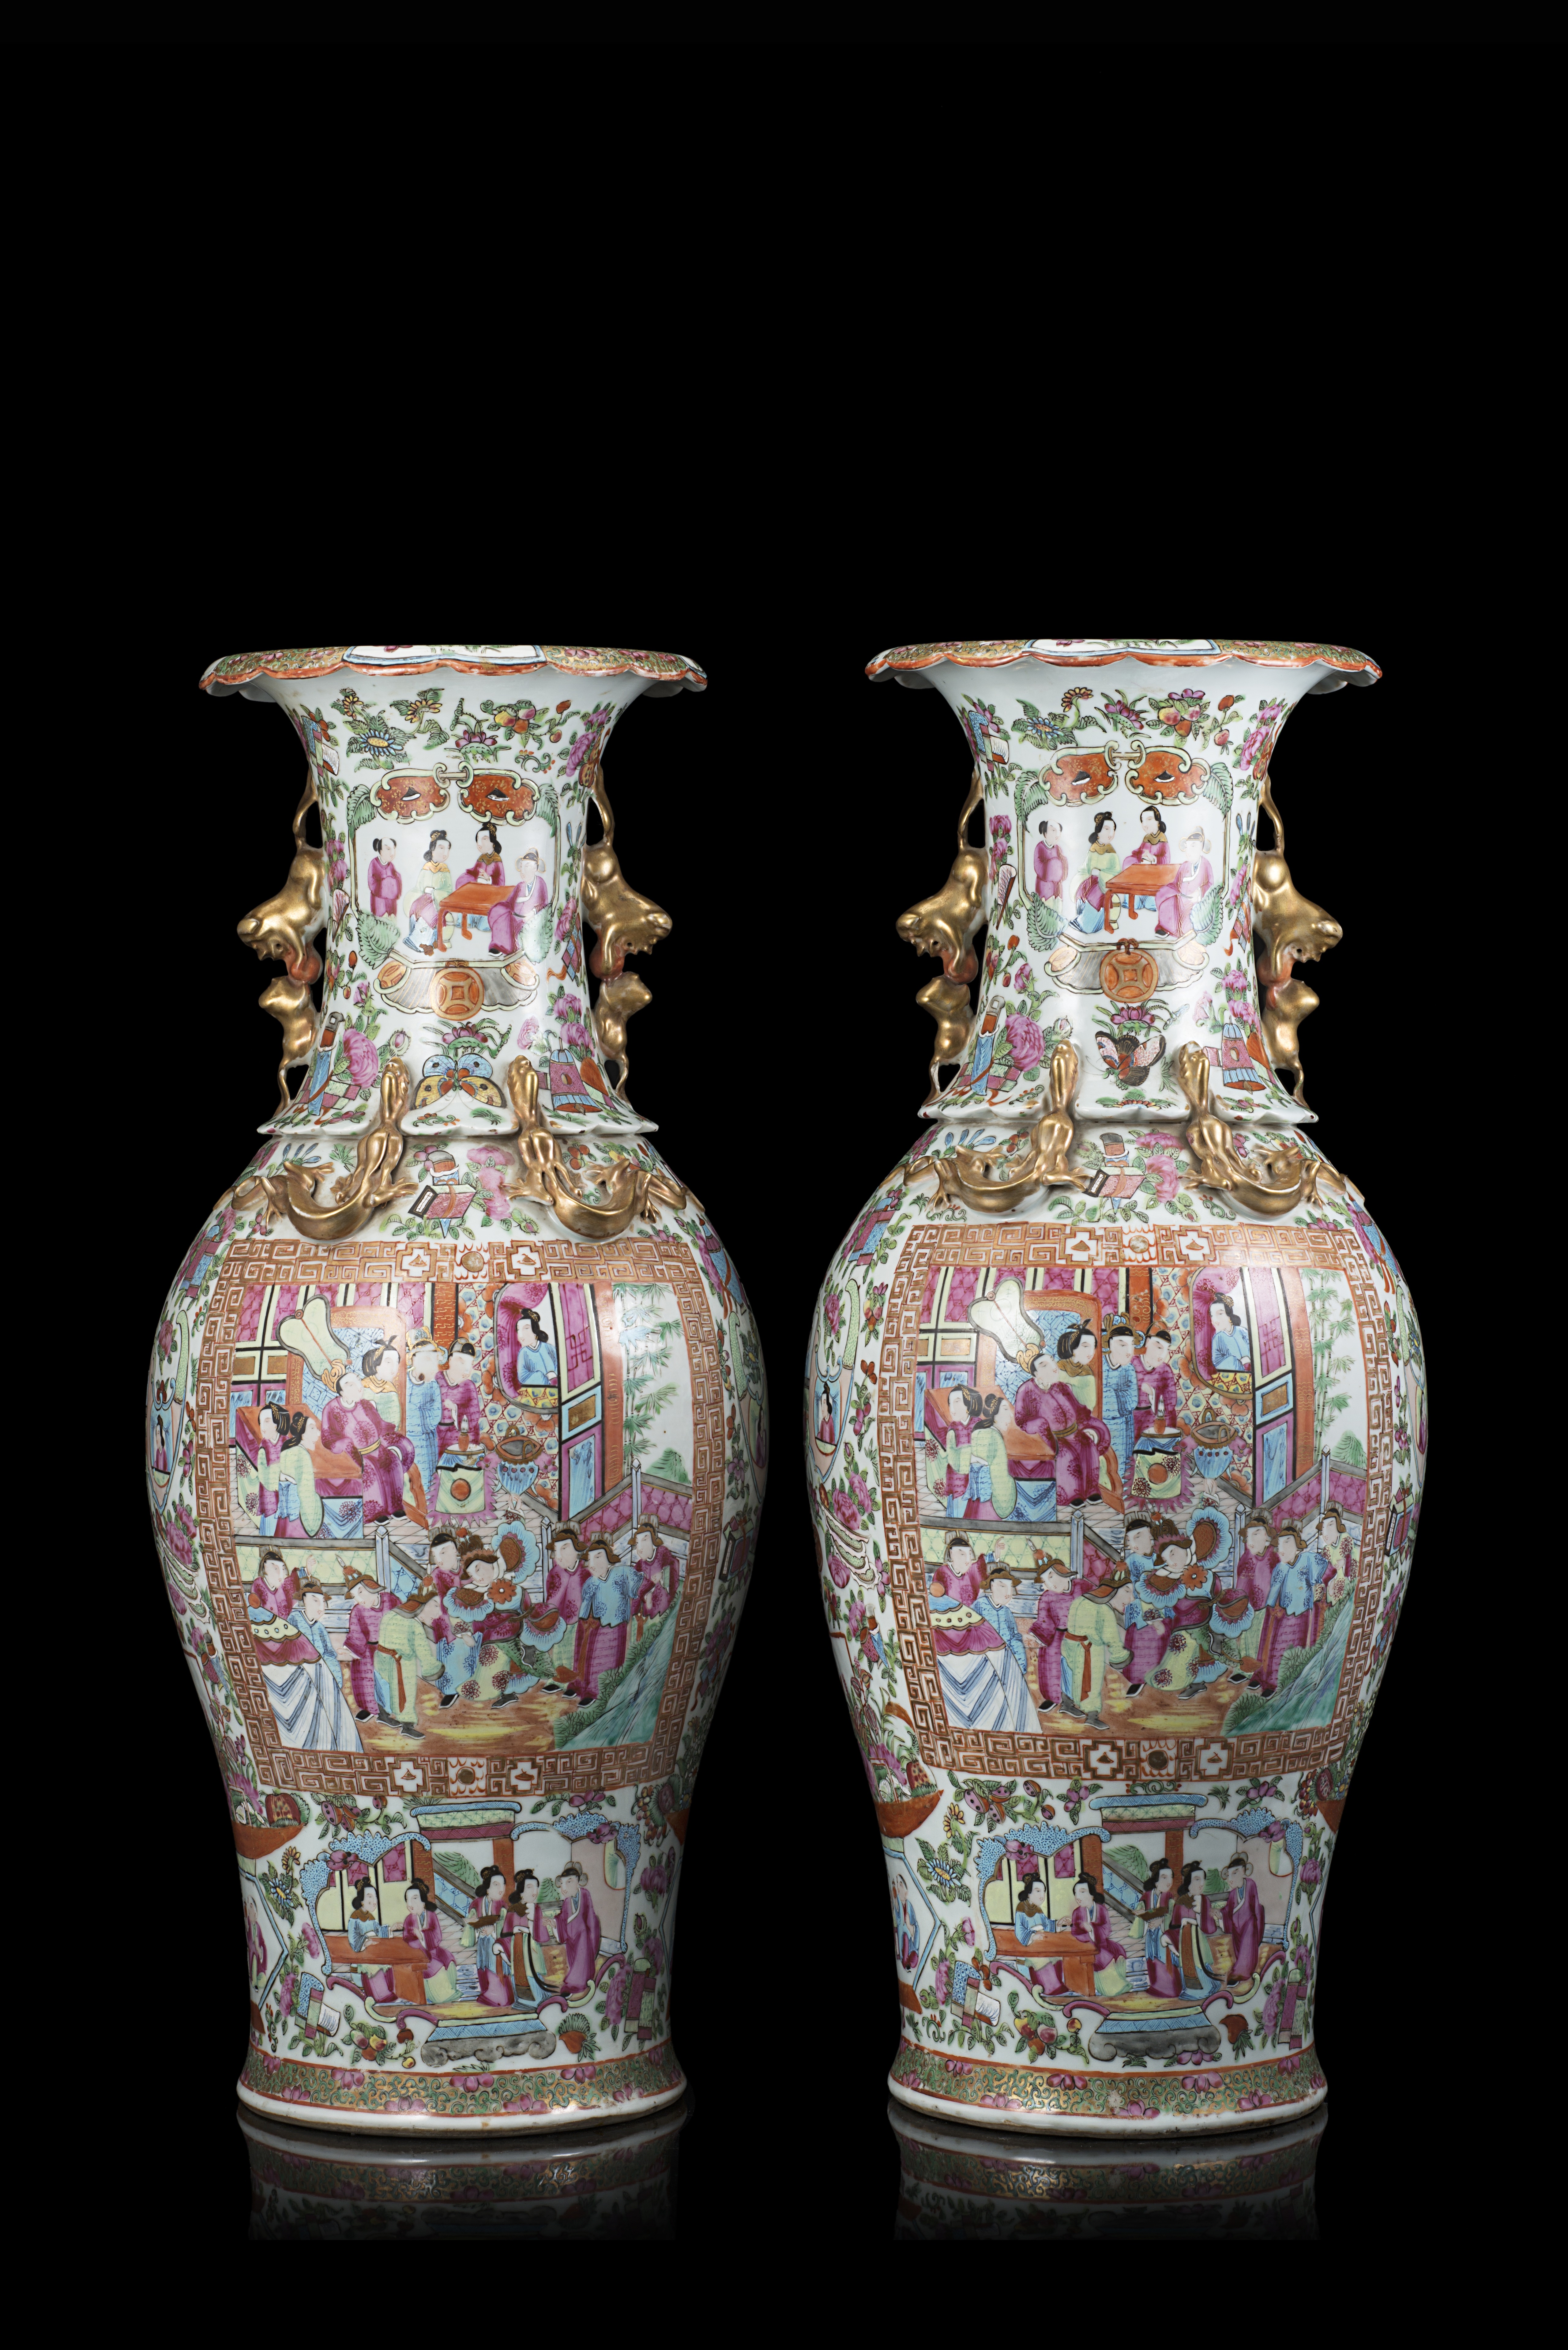 A pair of Cantonese Famille Rose vases decorated with figures in interior scenes and floral - Image 2 of 3